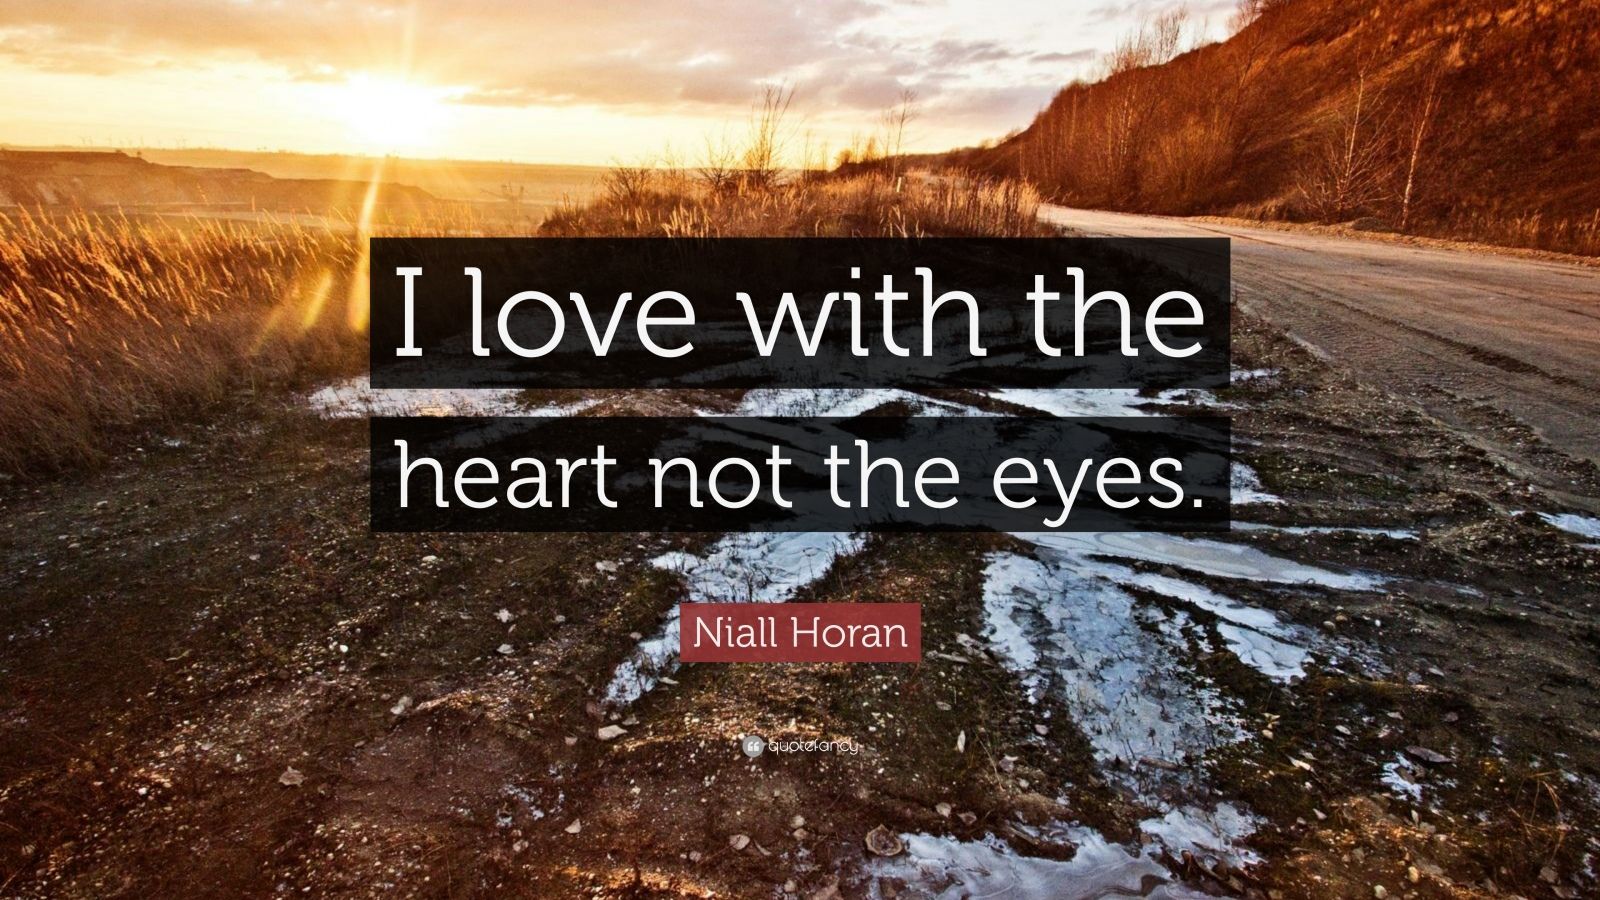 Niall Horan Quote: “I love with the heart not the eyes.” (12 wallpapers ...